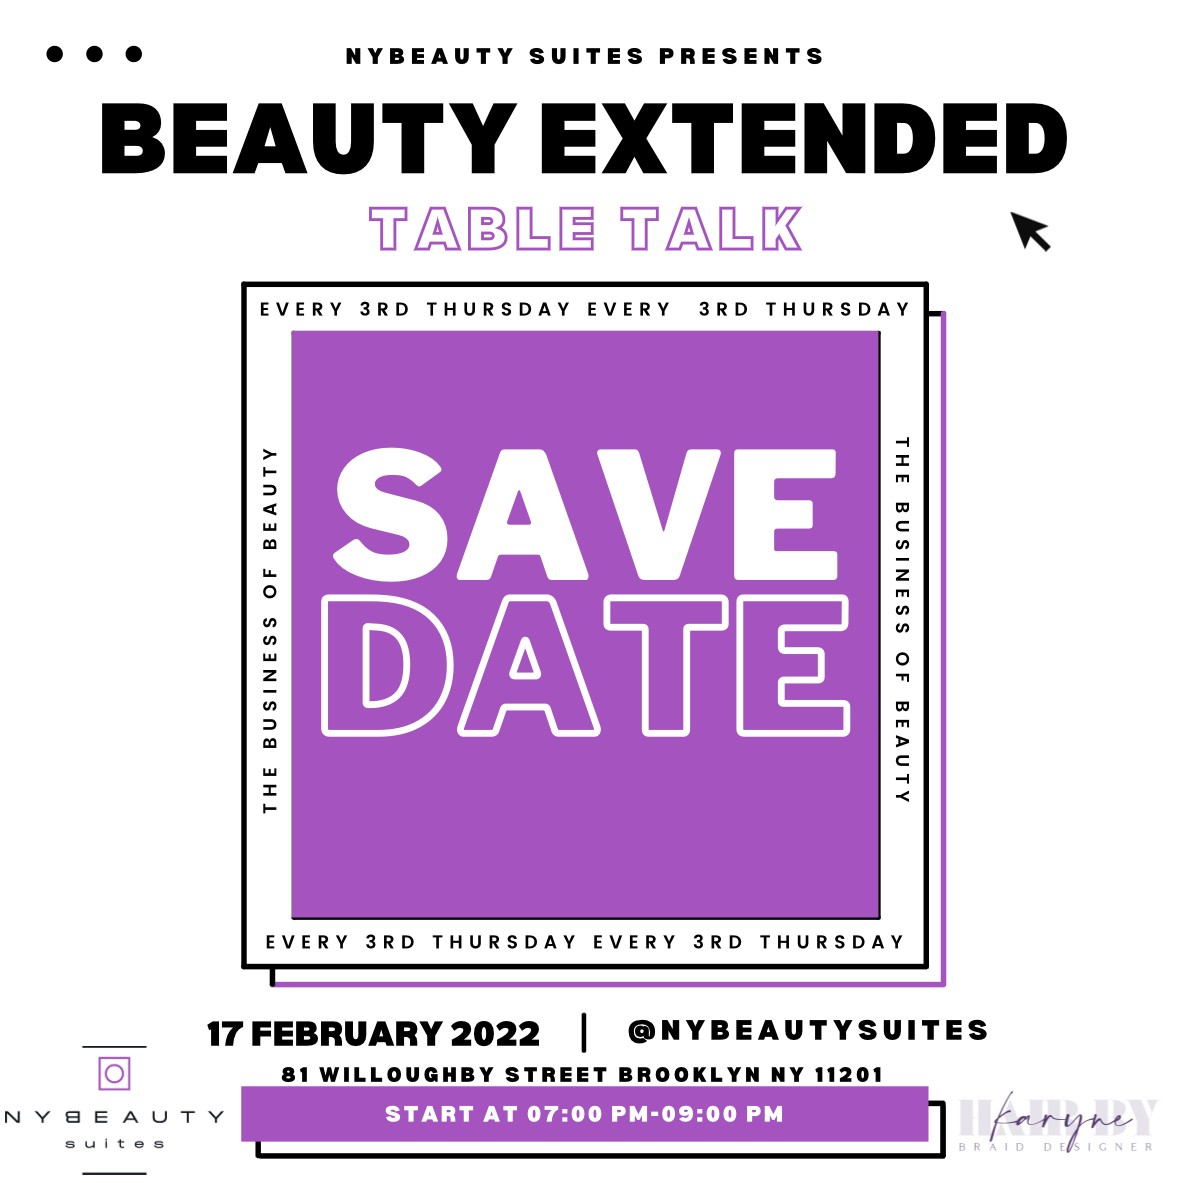 nybeauty-suites-beauty-extended-table-talk-event-with-Hair-by-Karyne